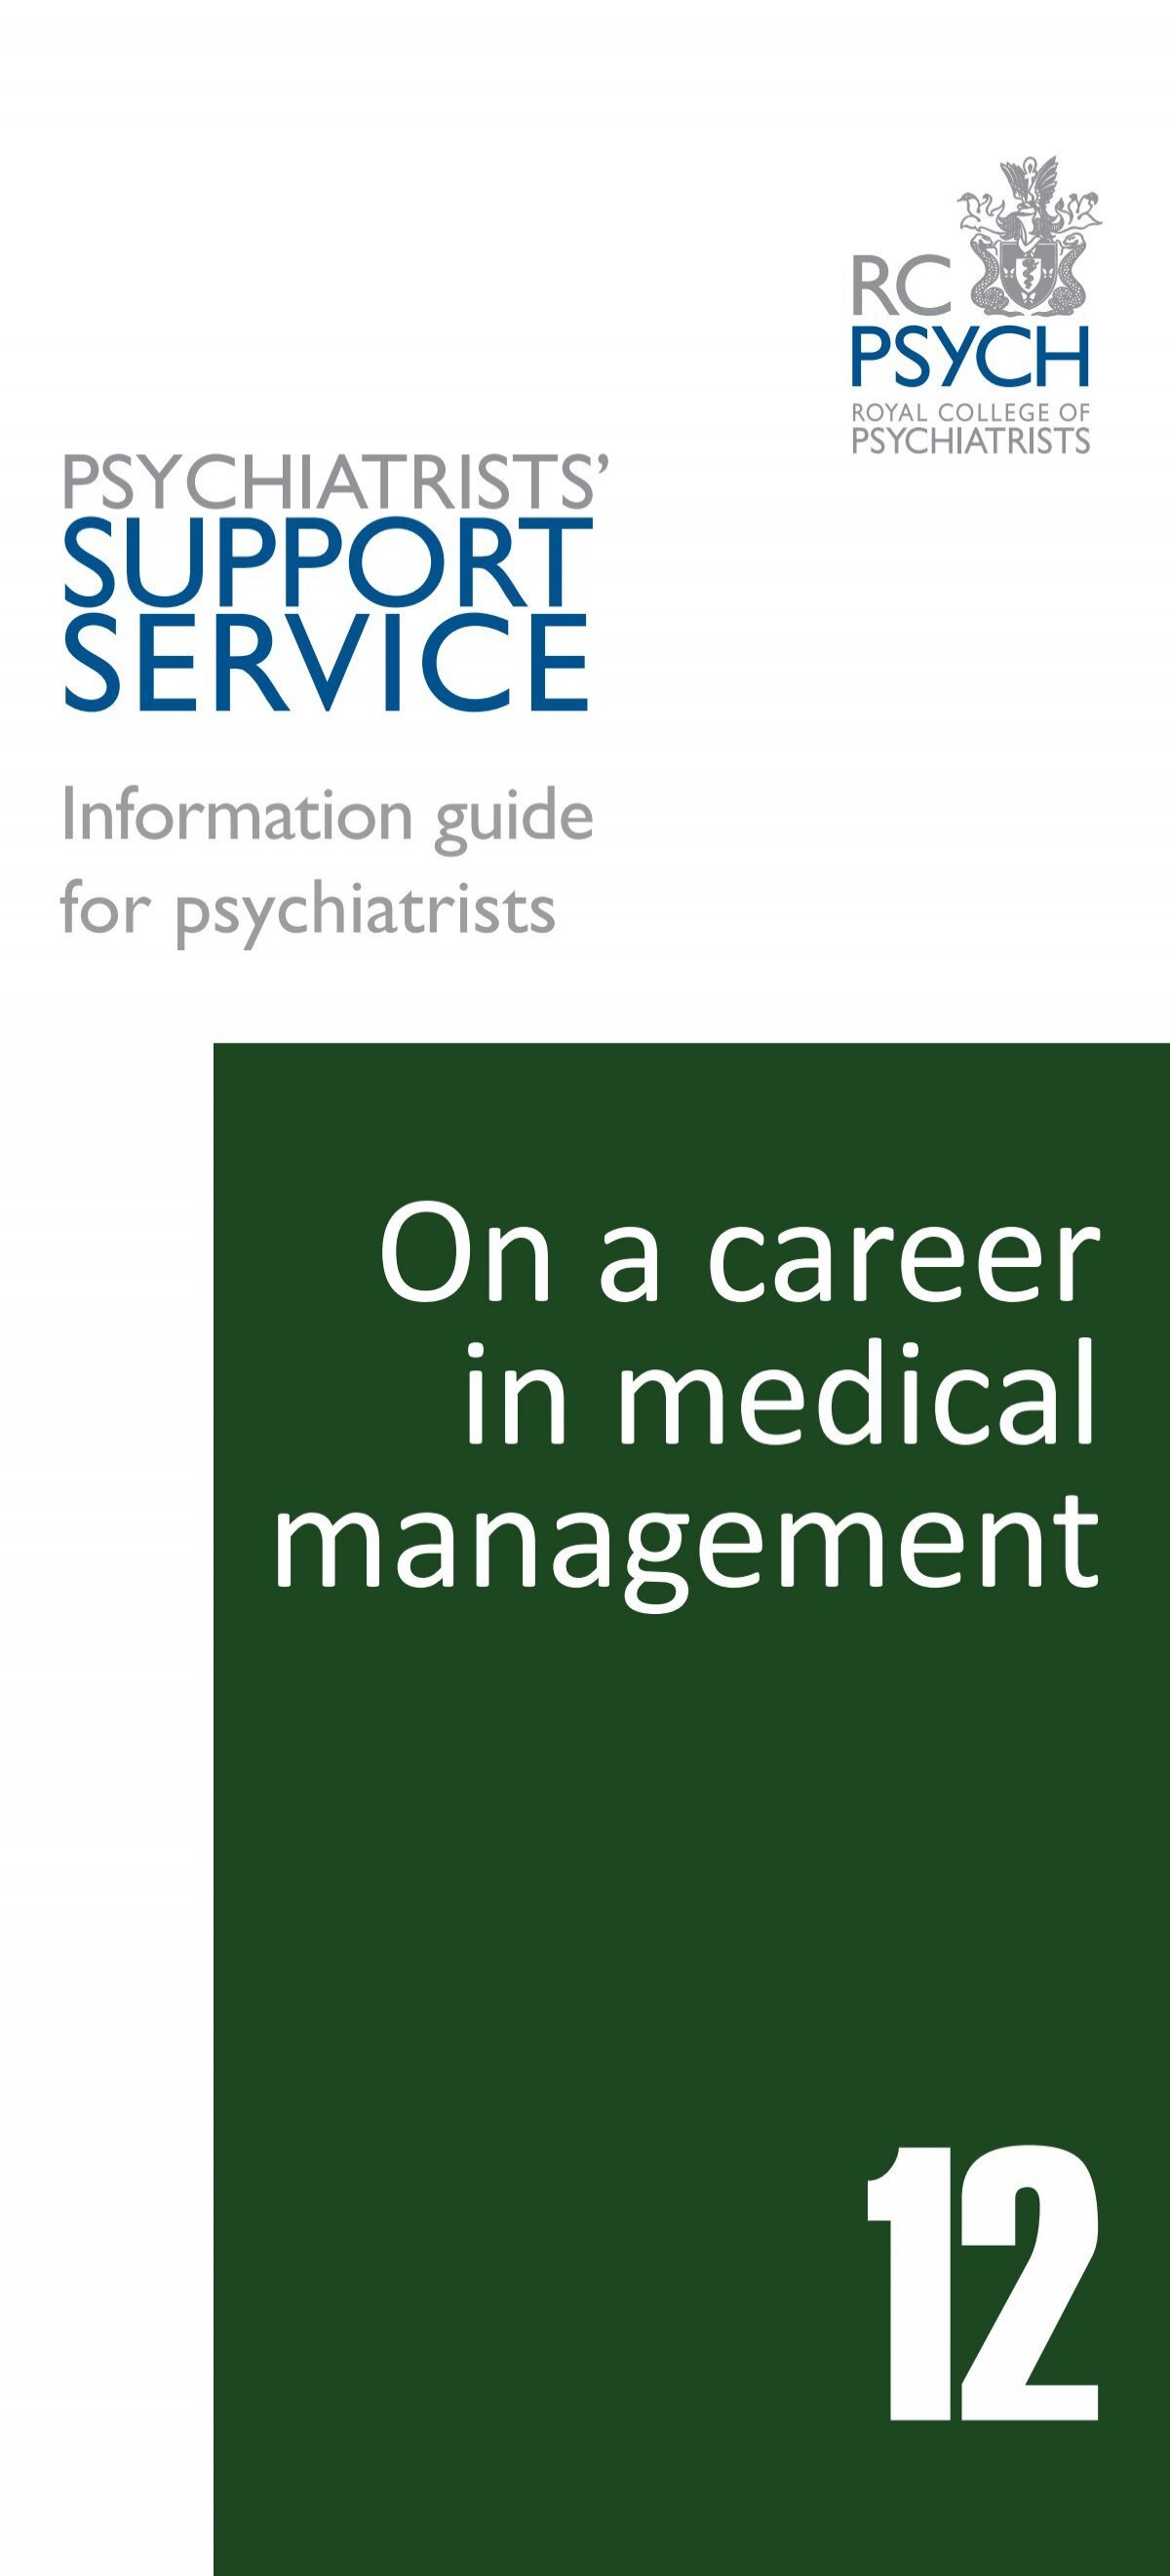 On a career in medical management - Royal College of Psychiatrists